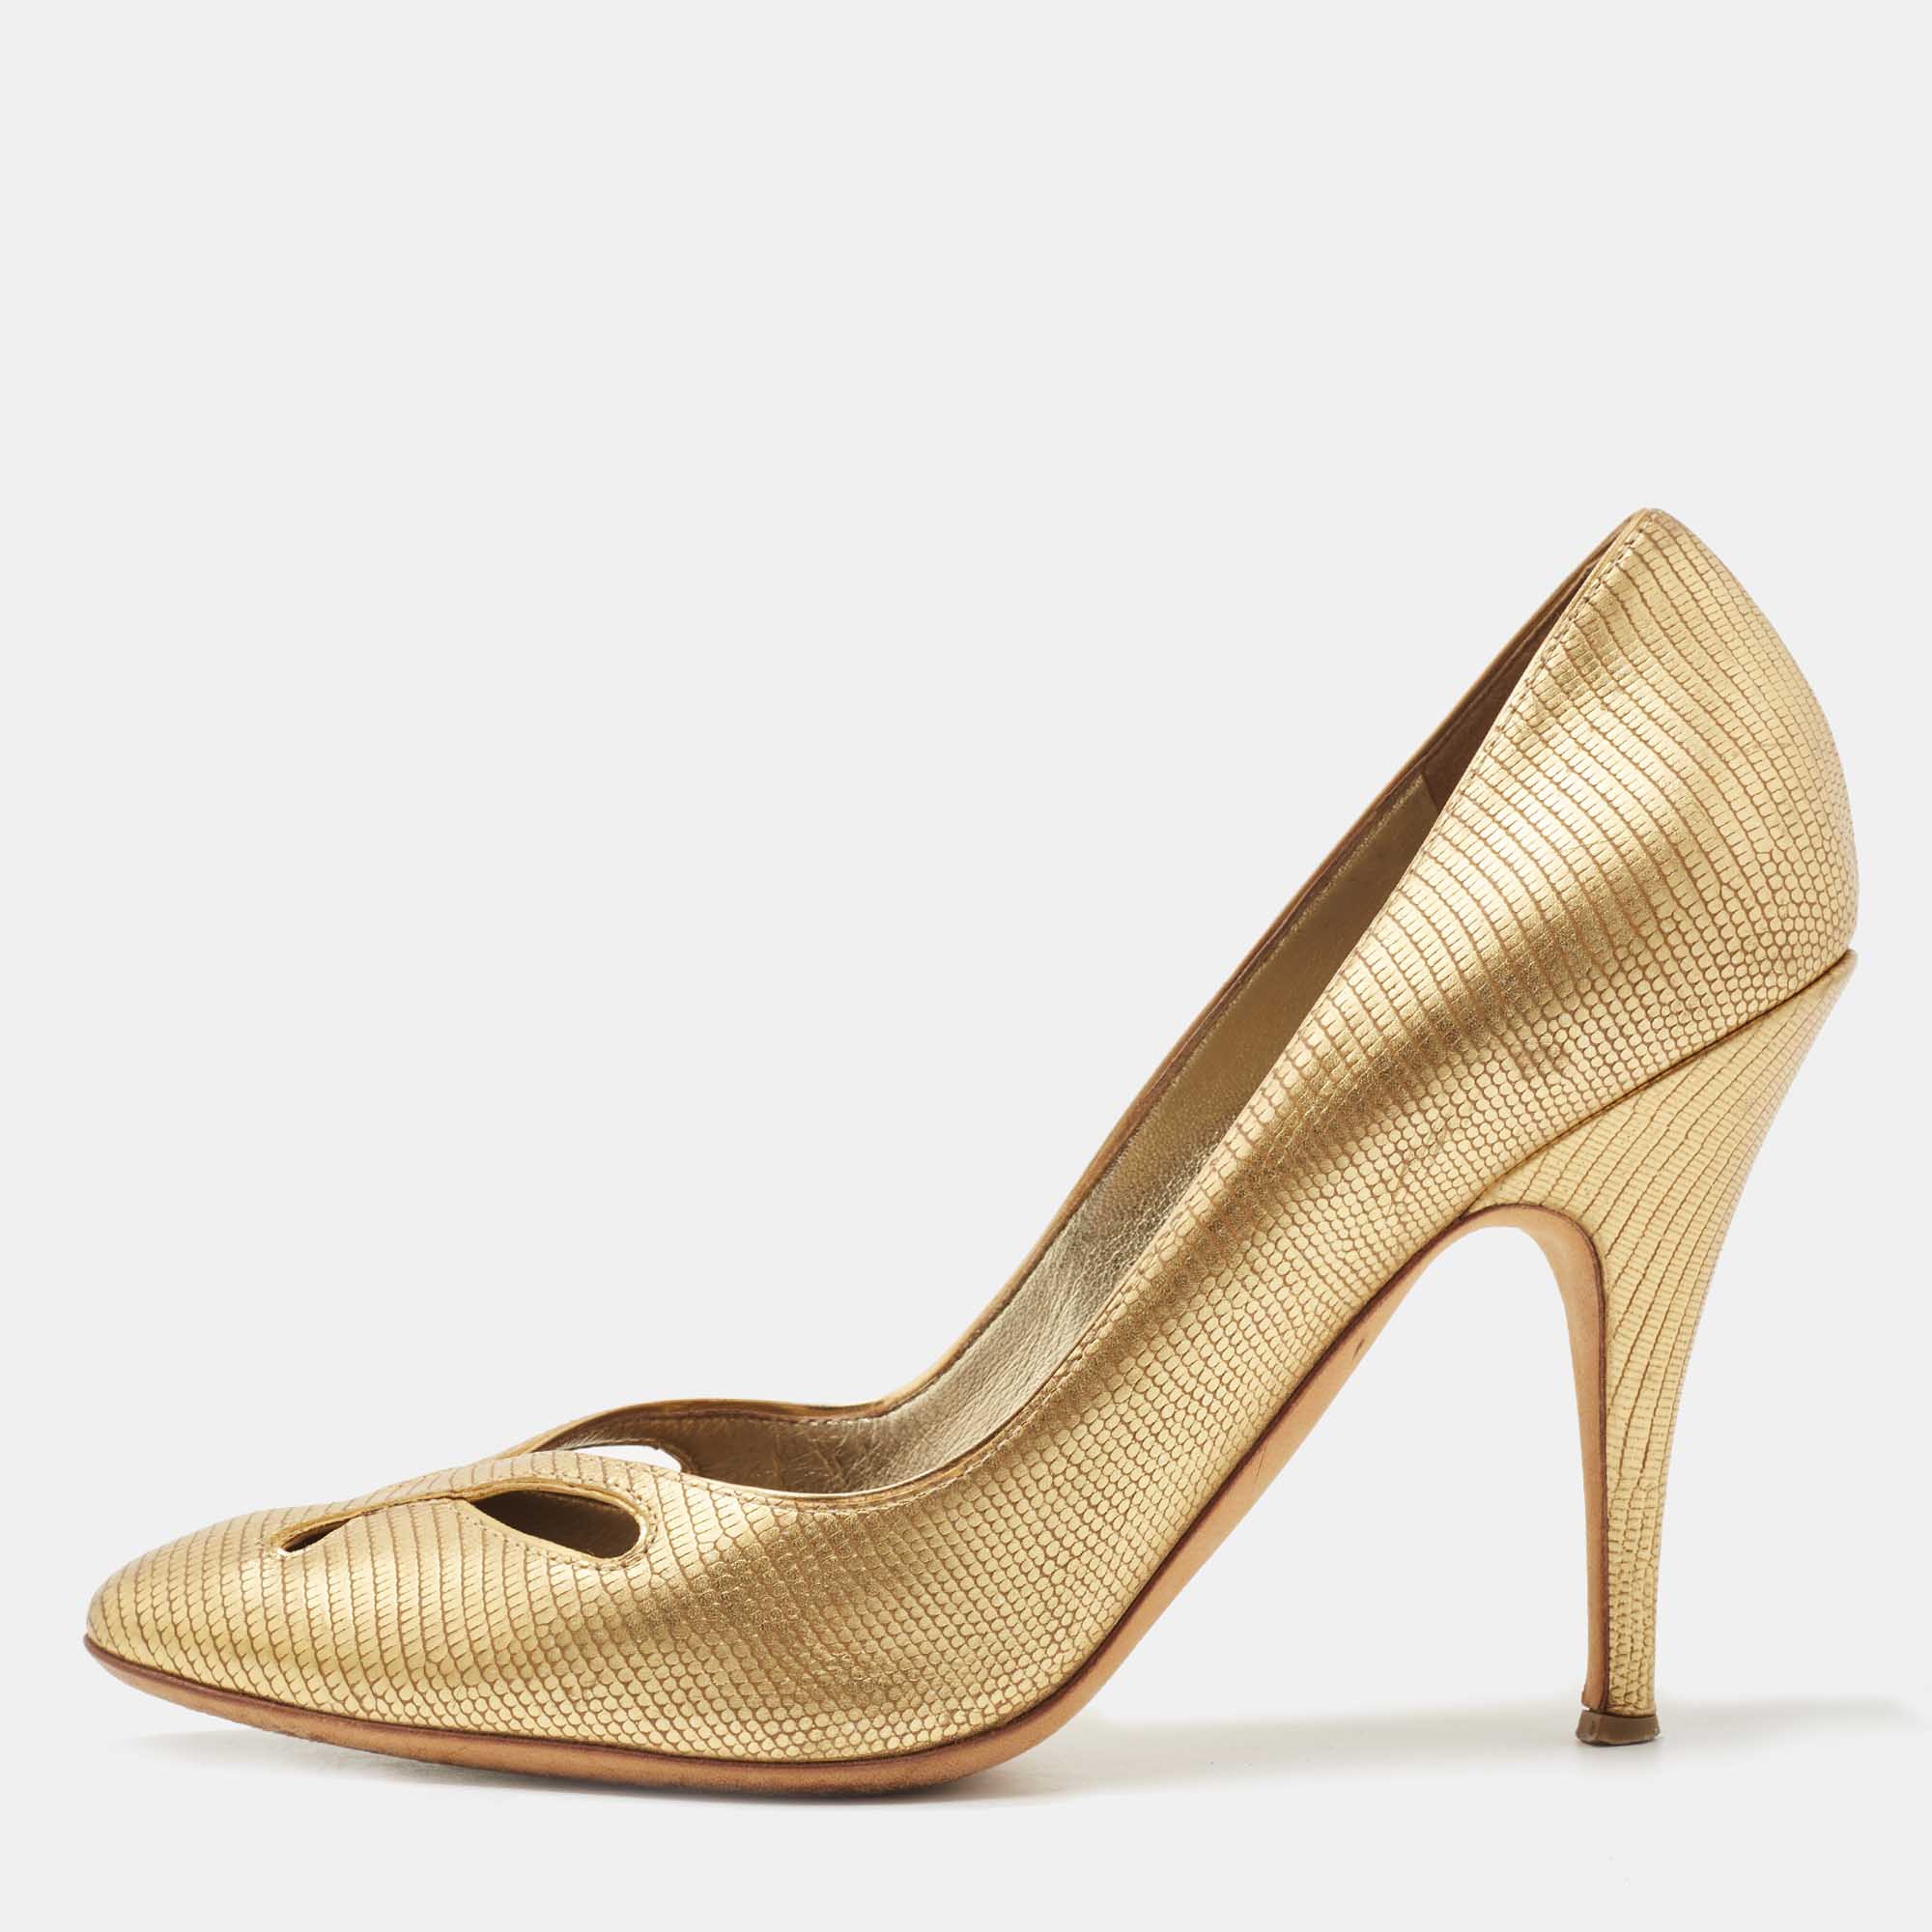 Pre-owned Giuseppe Zanotti Gold Lizard Embossed Leather Cut Out Pumps Size 37.5